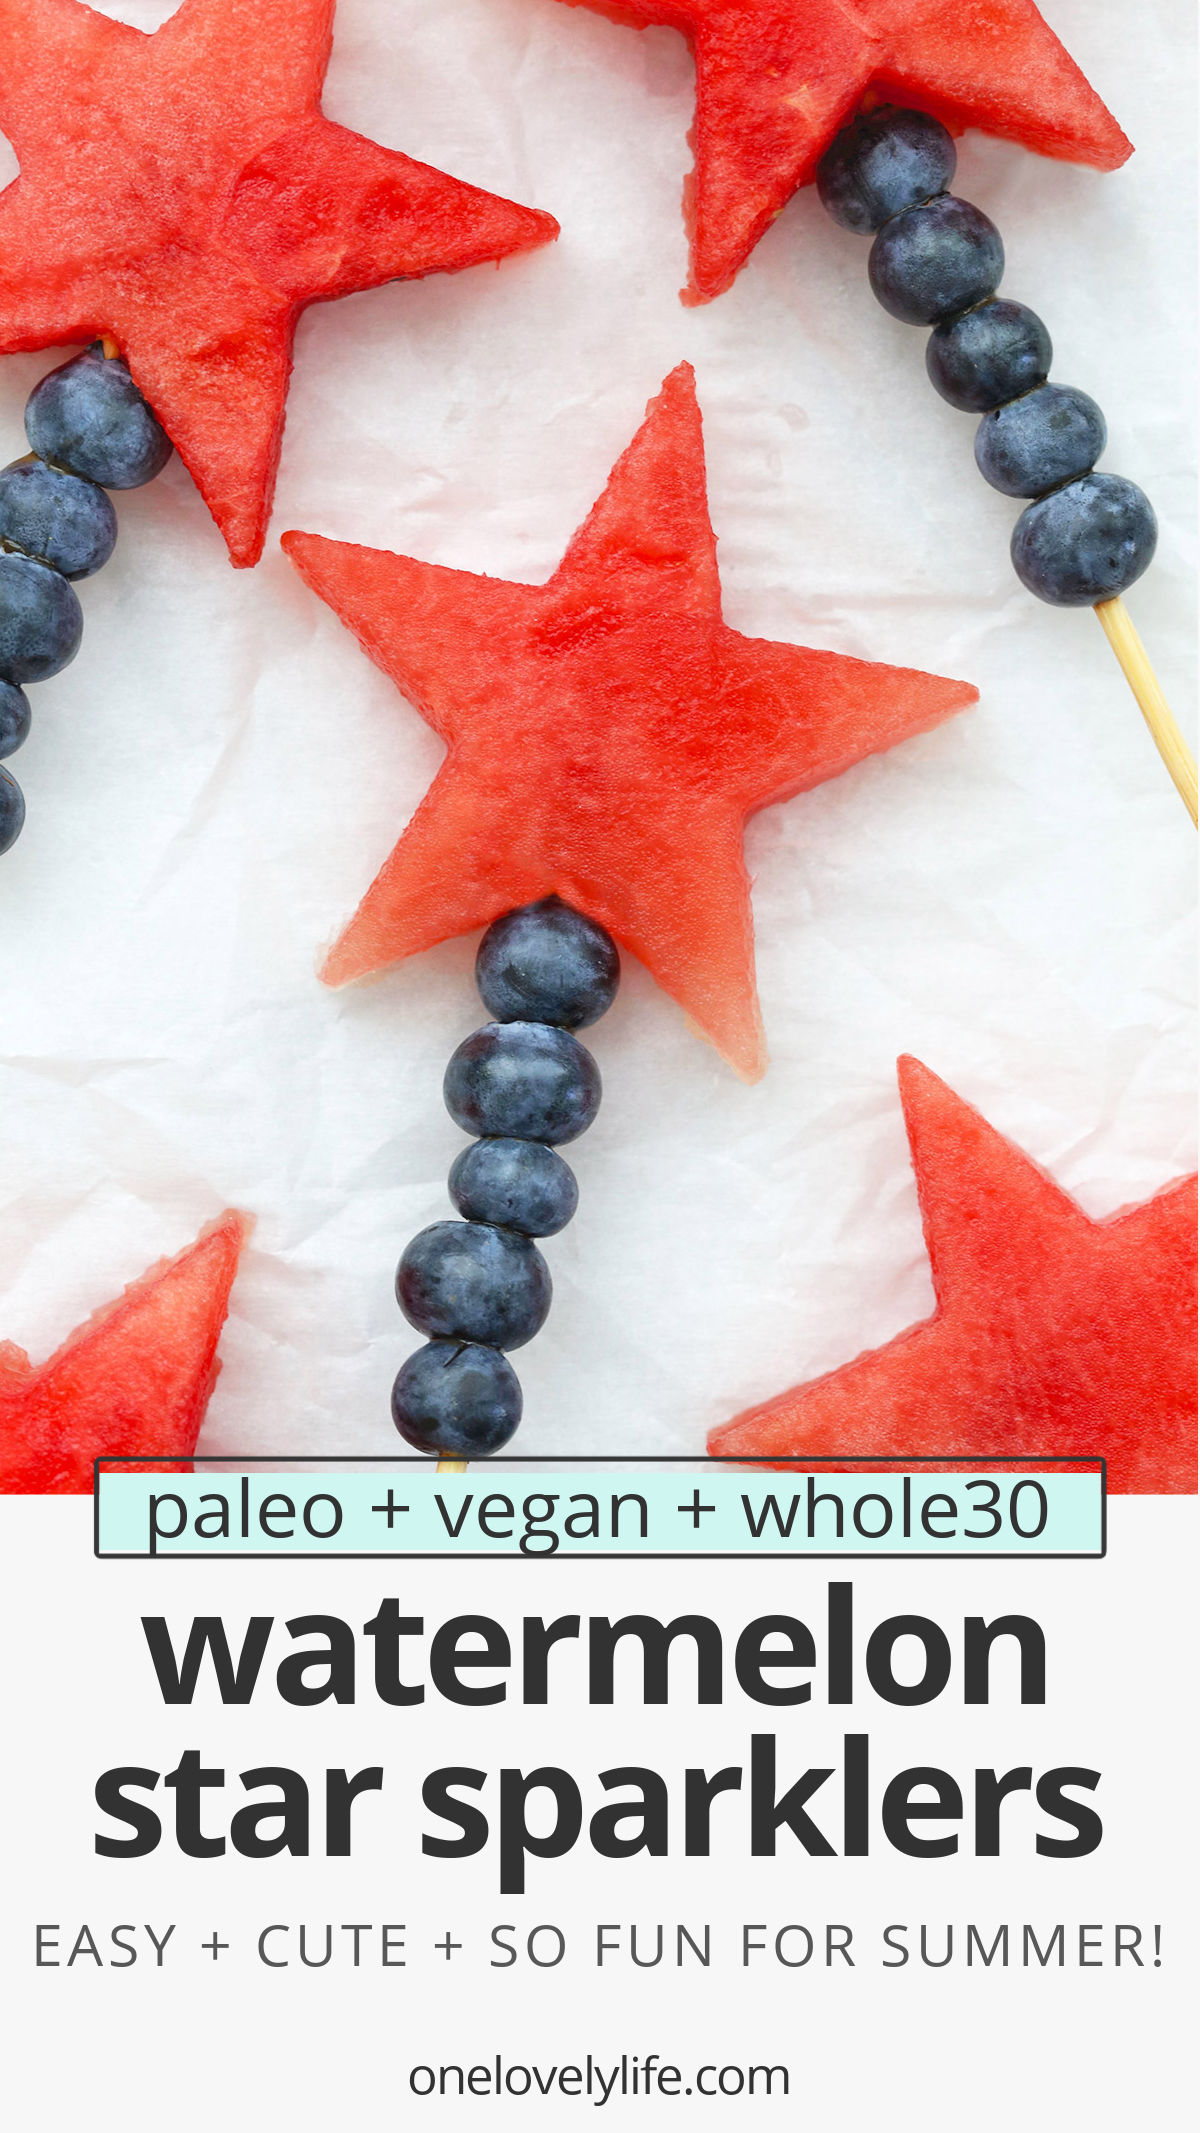 Watermelon Star Sparklers - Watermelon stars and blueberries combine to make these fun, patriotic fruit sparklers. They're a perfect, easy snack or summer side dish. (Naturally Paleo, Vegan & Gluten-Free) // Patriotic Fruit Skewers // 4th of July Side Dish // Red White and Blue Recipes // 4th of july snack // 4th of july menu // fun snacks for kids // kids snack // kids snack with fruit / watermelon recipes